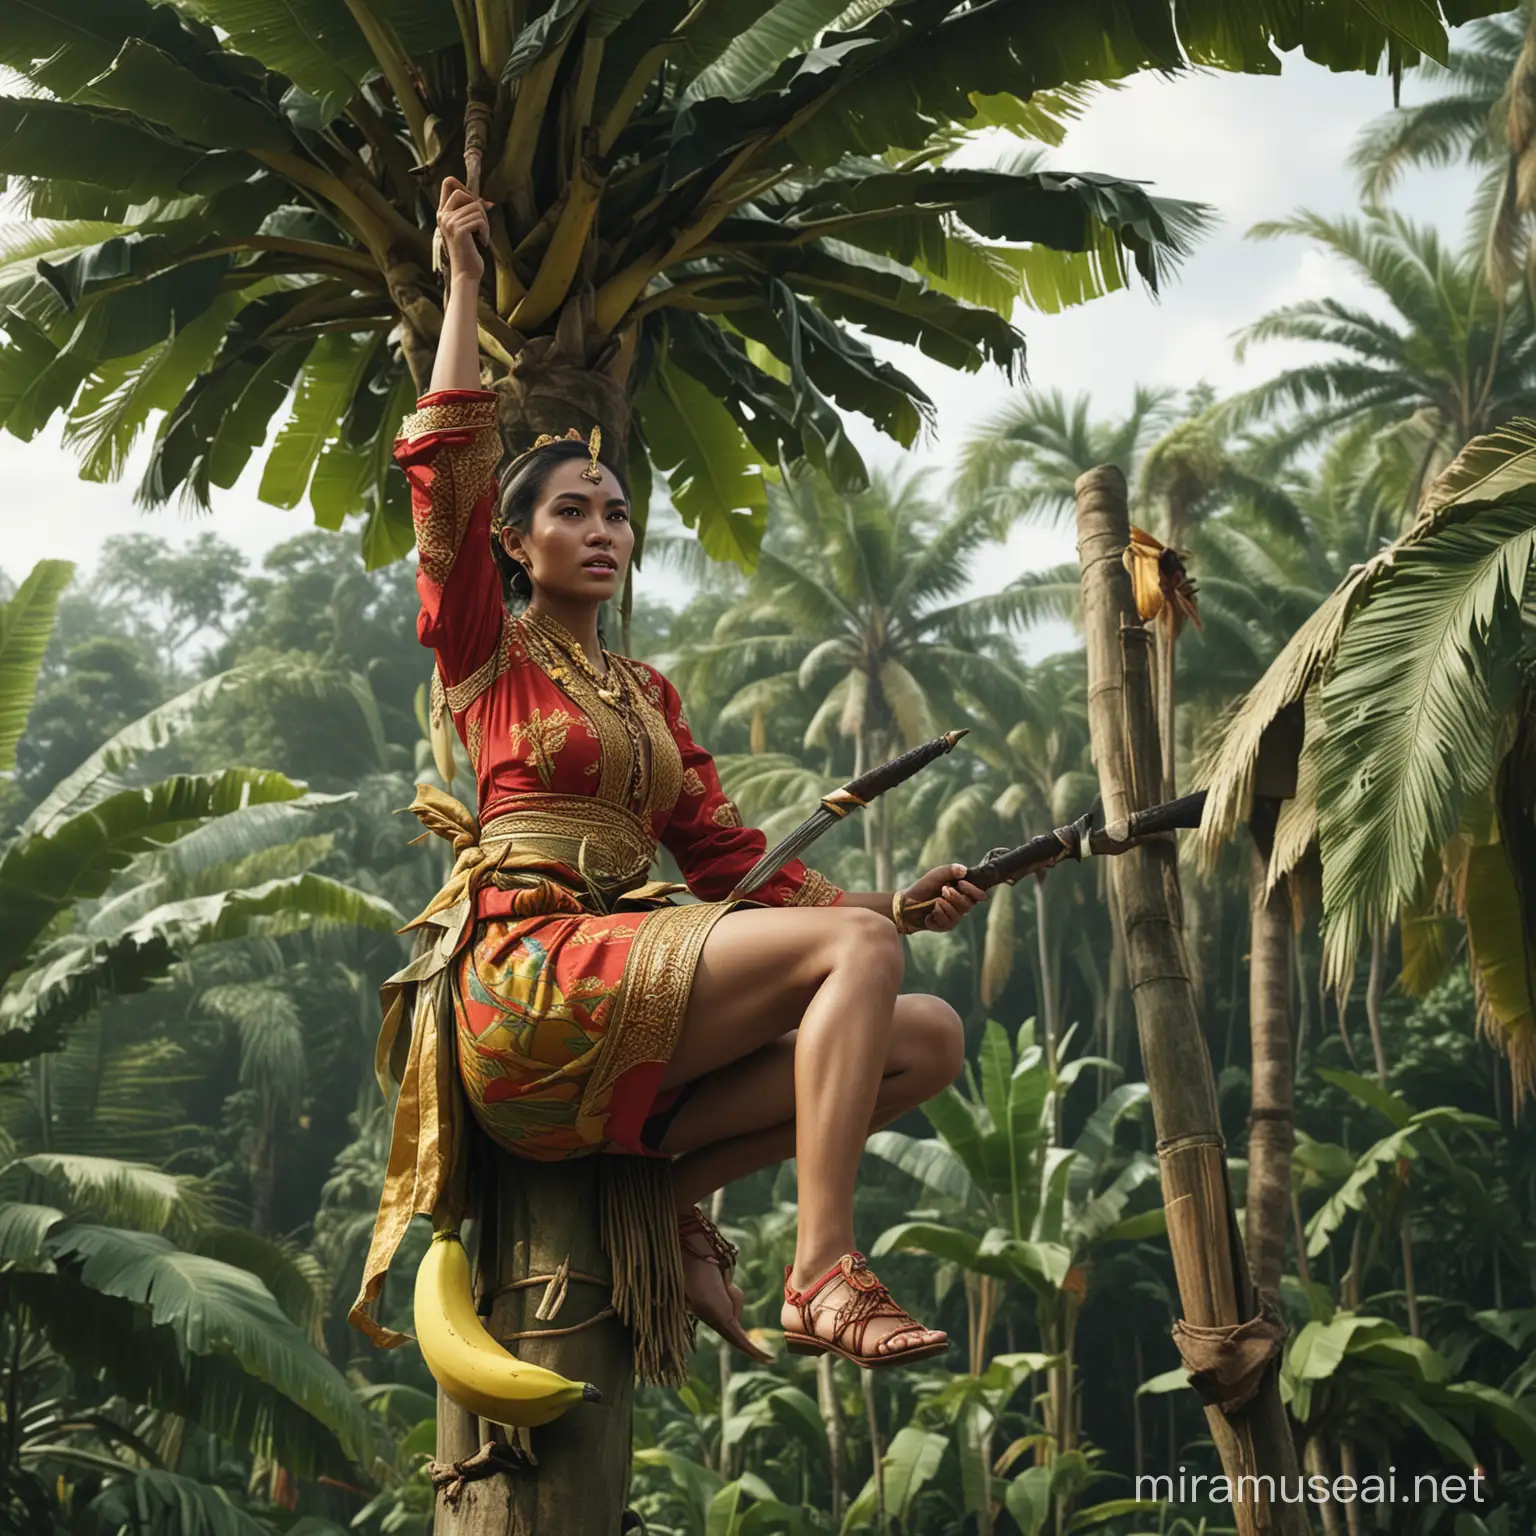 Traditional Indonesian Woman Climbing Banana Tree with Weapon HD Realistic Image